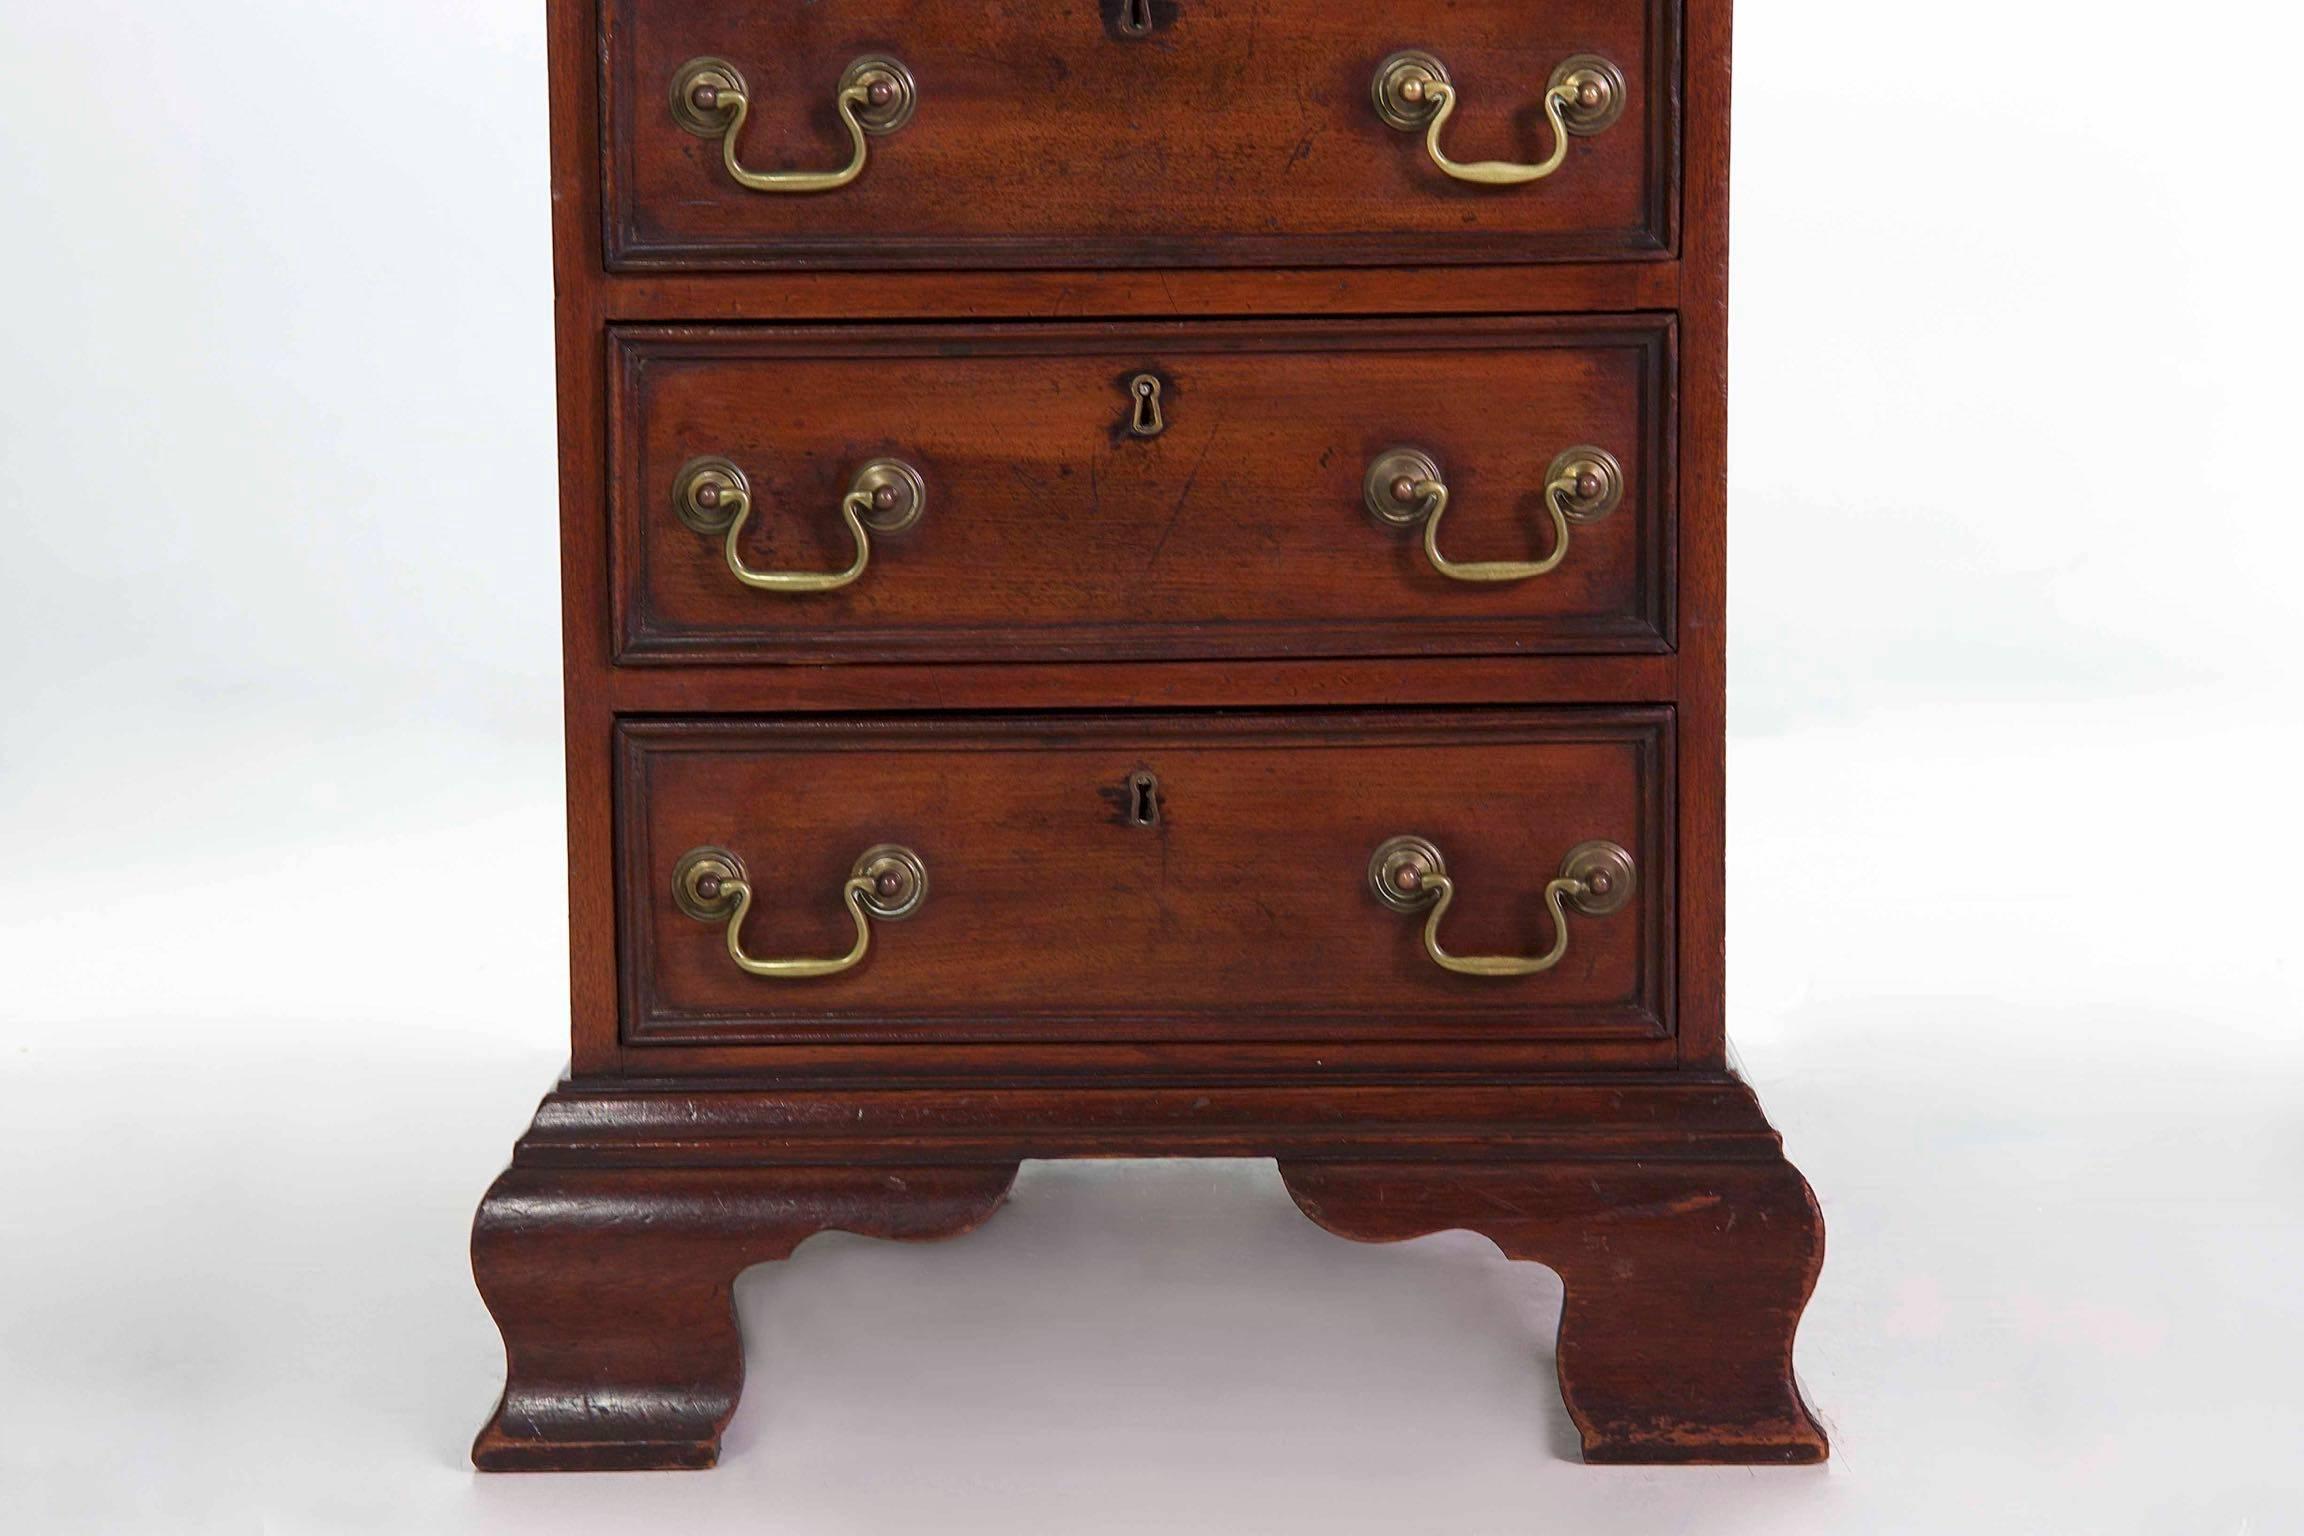 19th Century 20th Century English George III Style Mahogany and Leather Antique Pedestal Desk